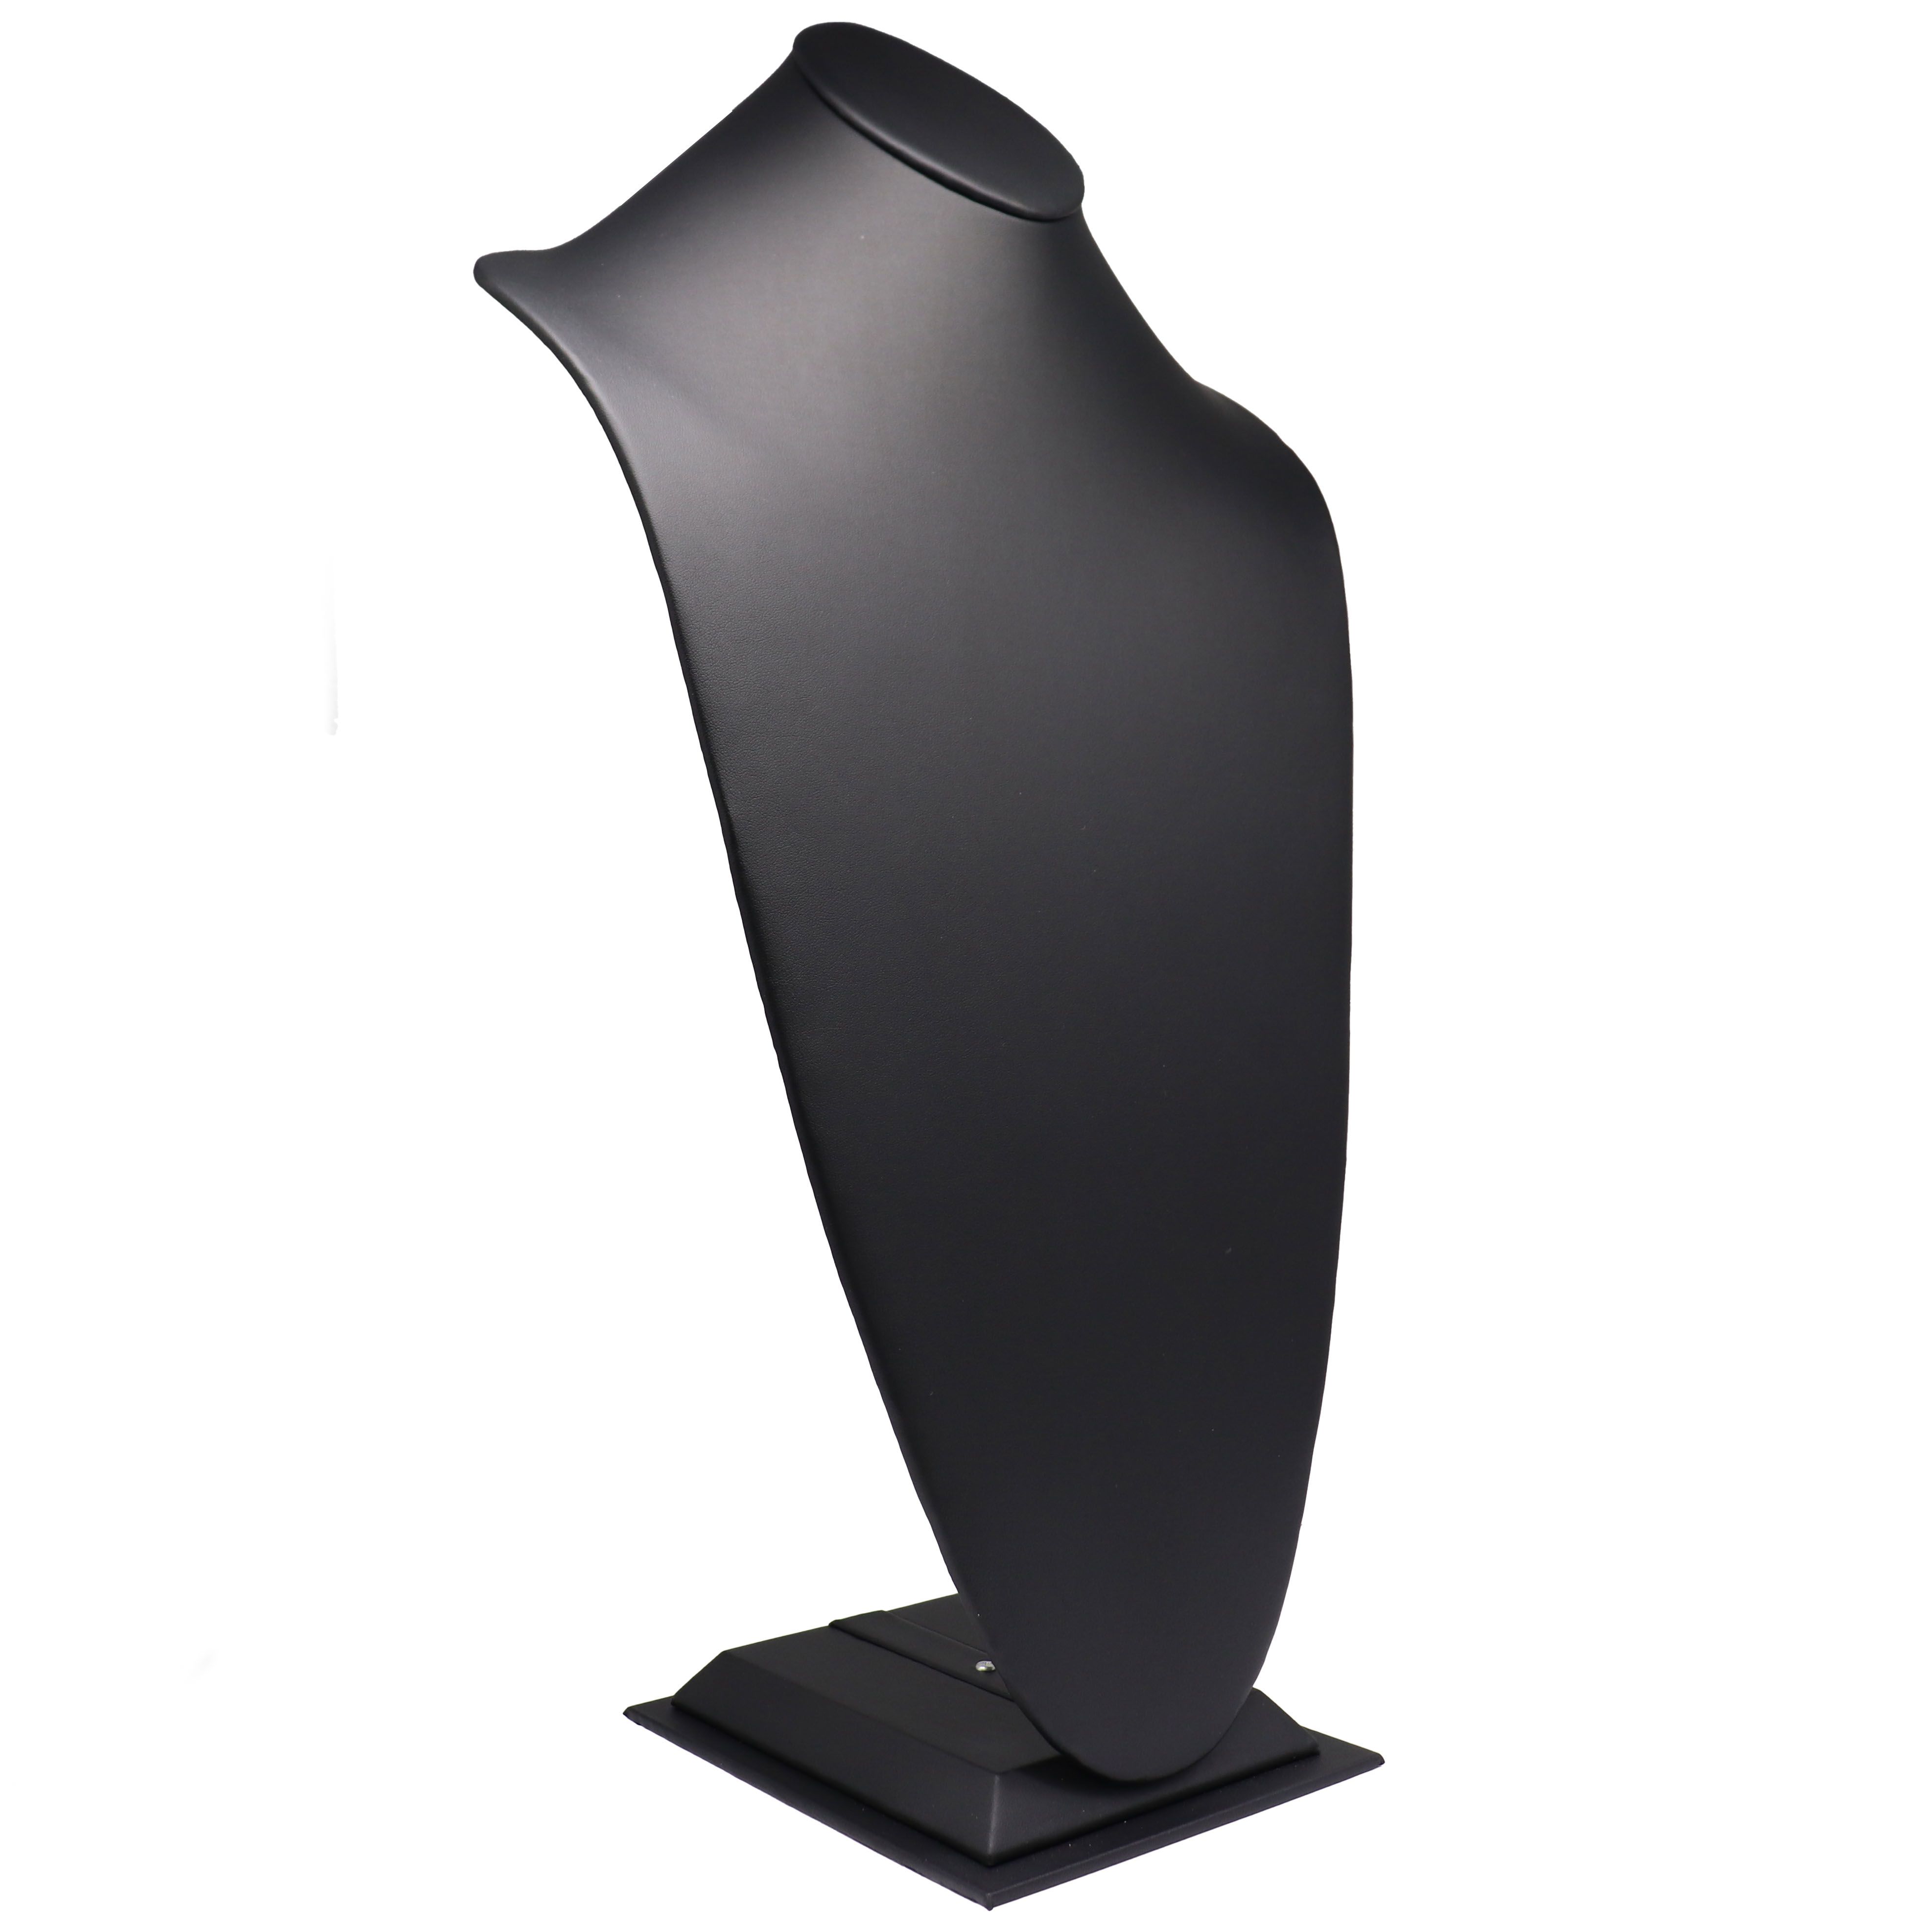 Black Leatherette Jewelry Necklace Display Stand, 22